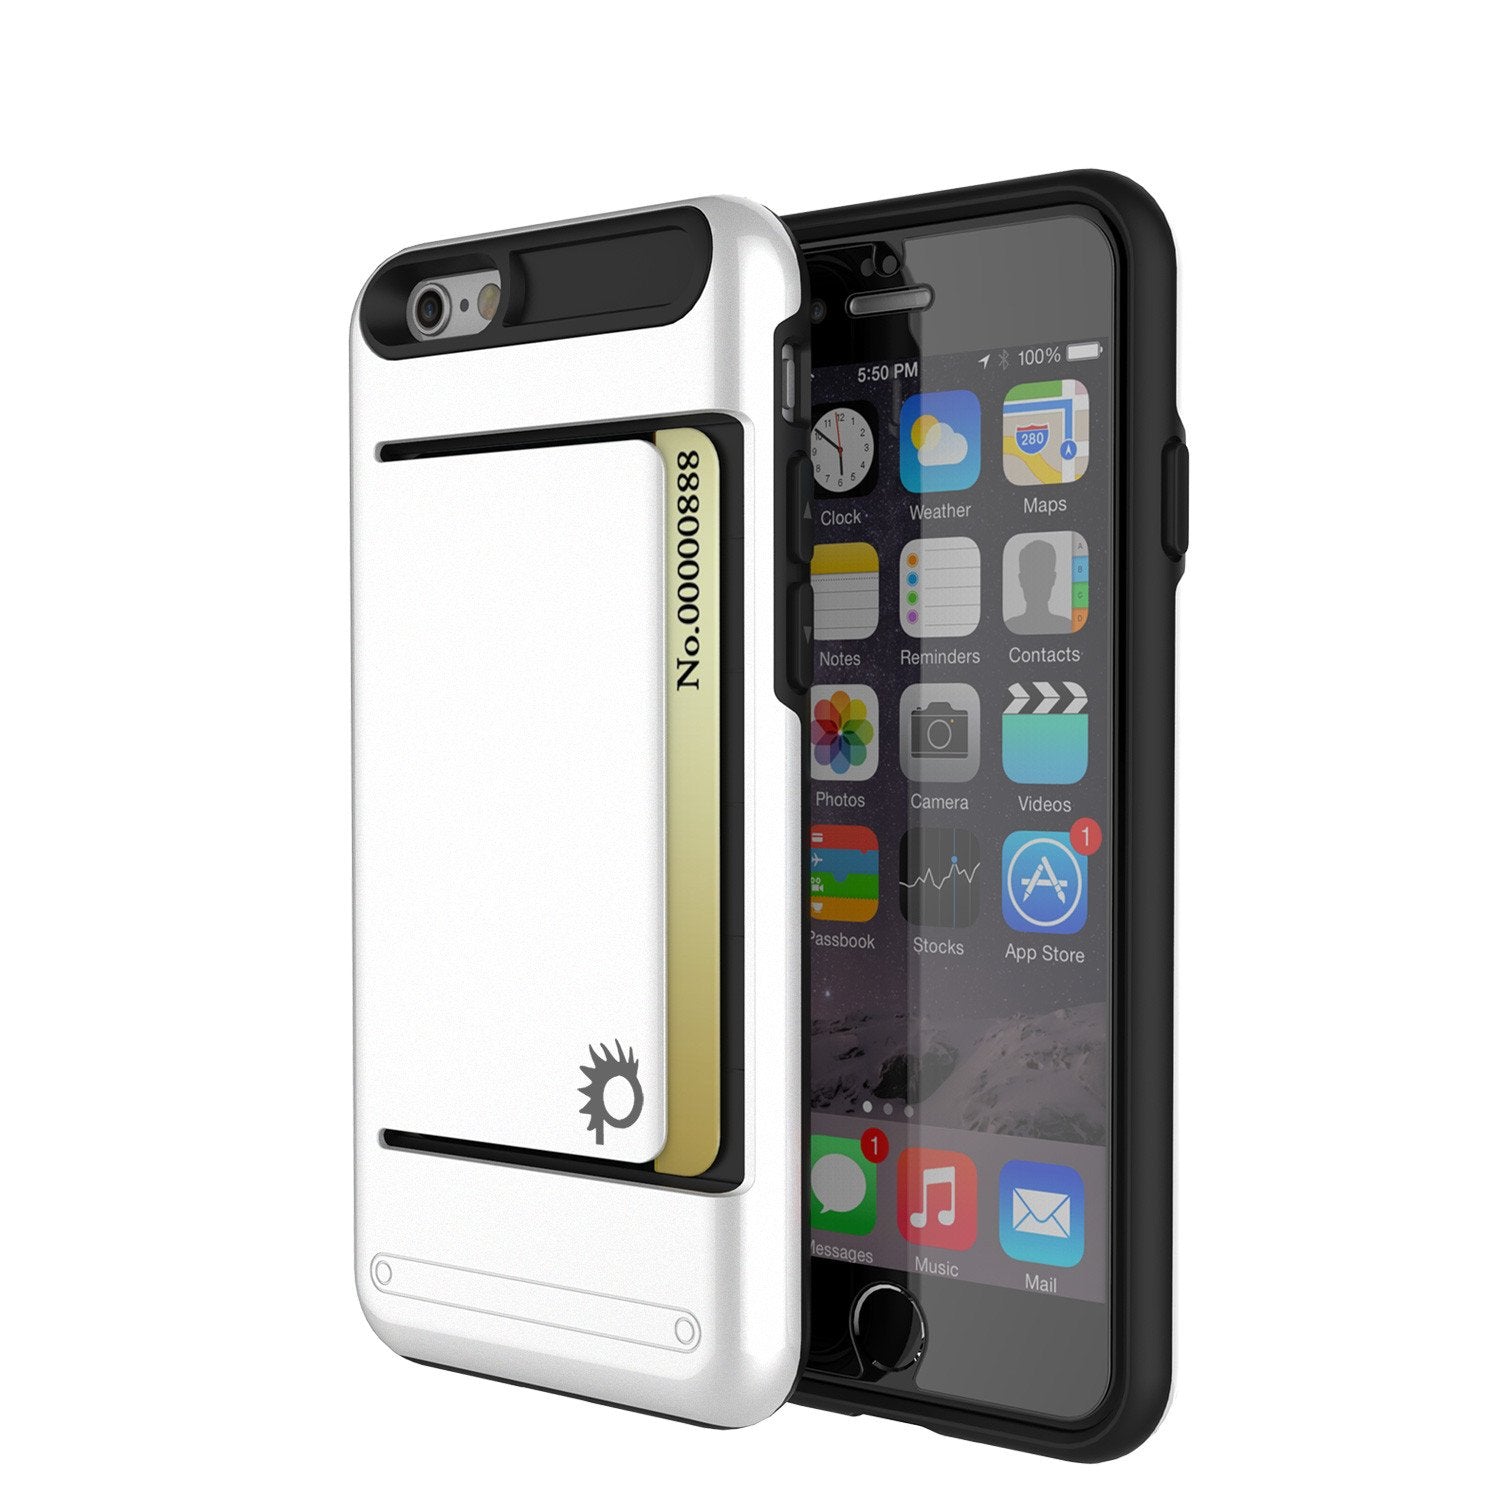 iPhone 6/6s Case PunkCase CLUTCH White Series Slim Armor Soft Cover Case w/ Tempered Glass